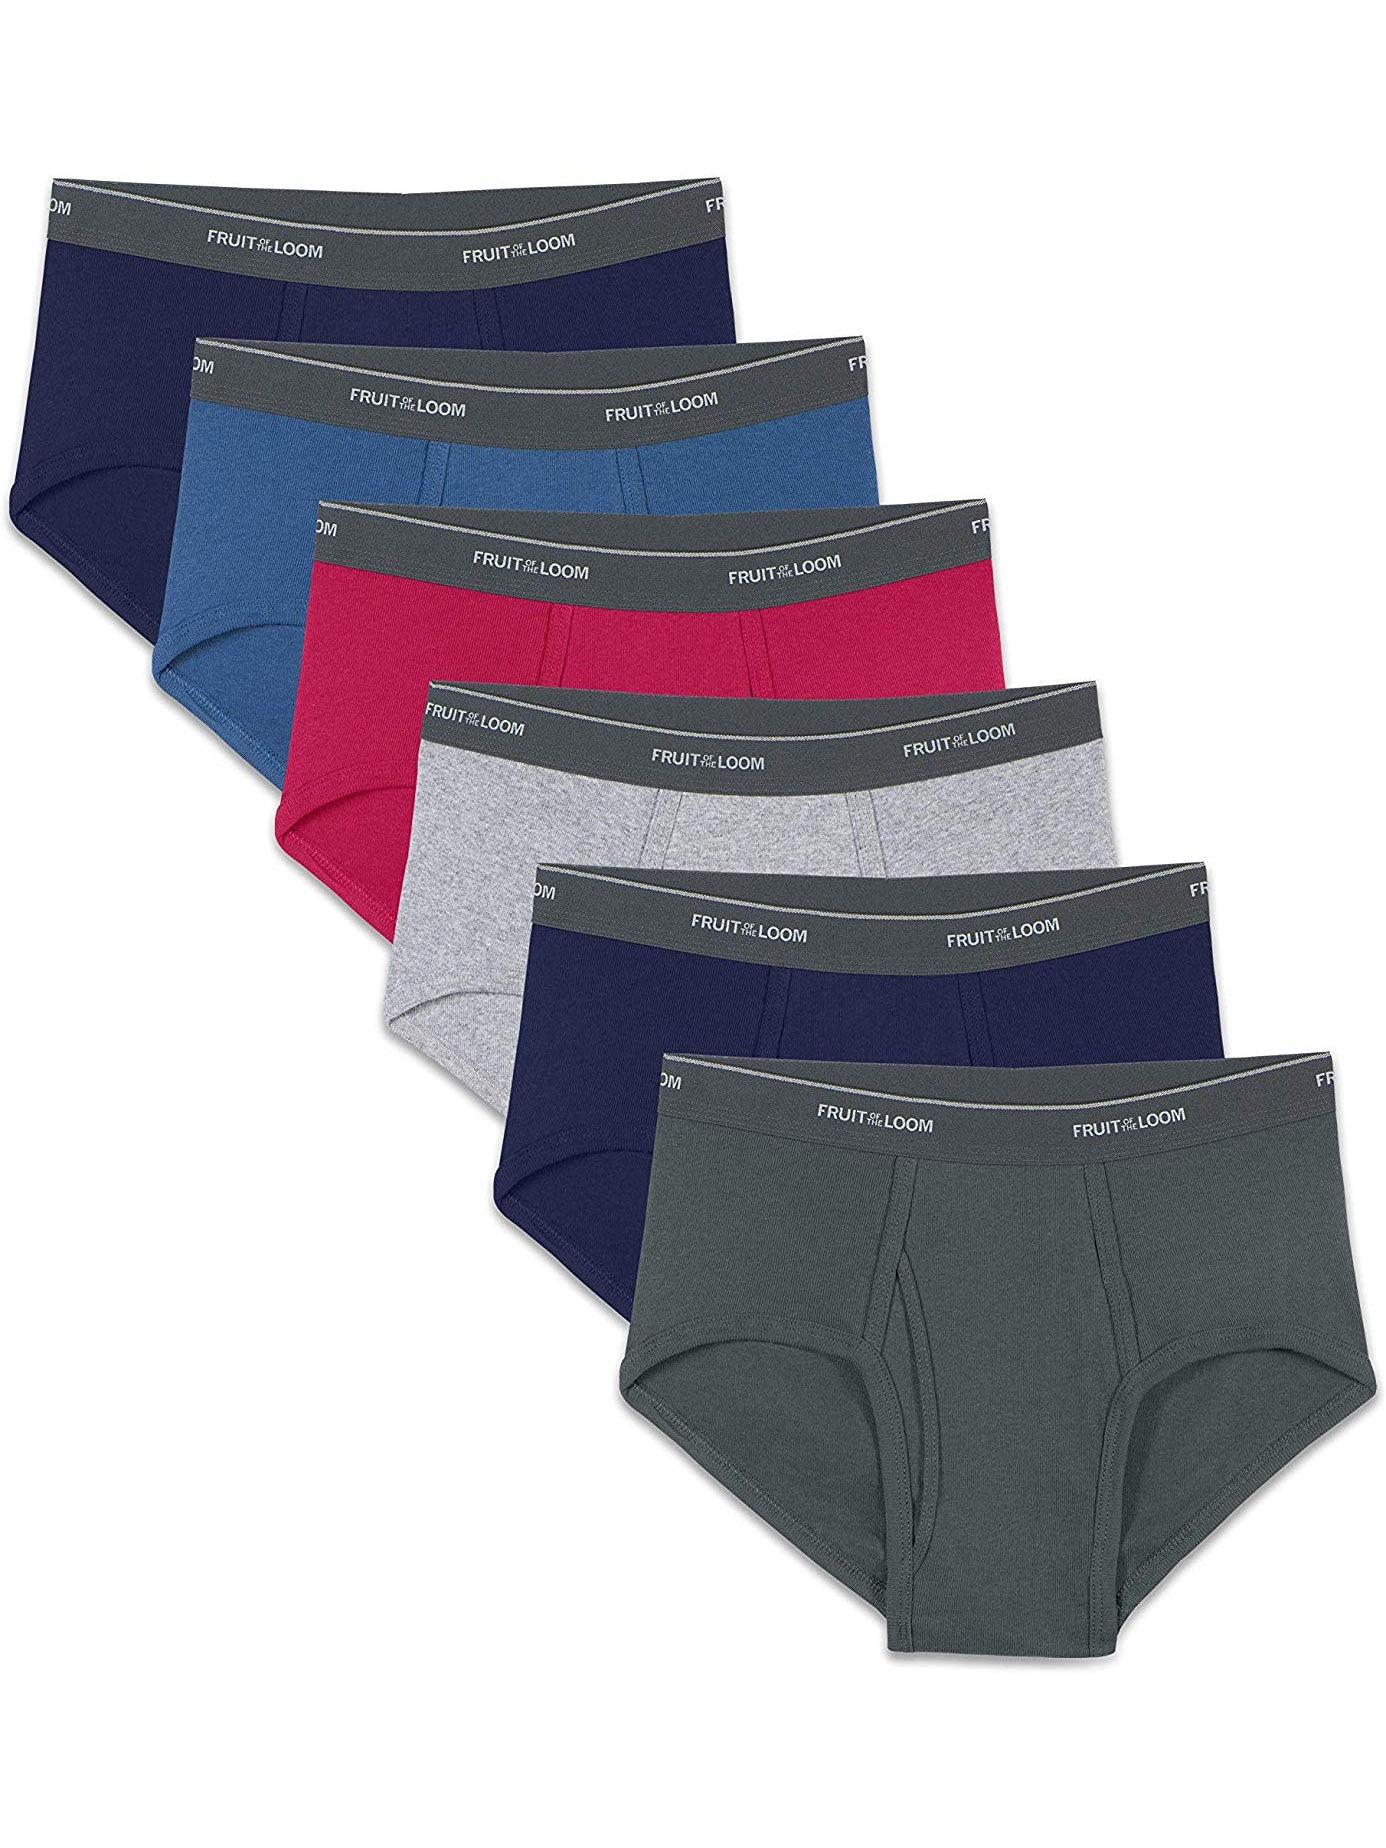 Mens Assorted Color Fashion Briefs 6 Pack